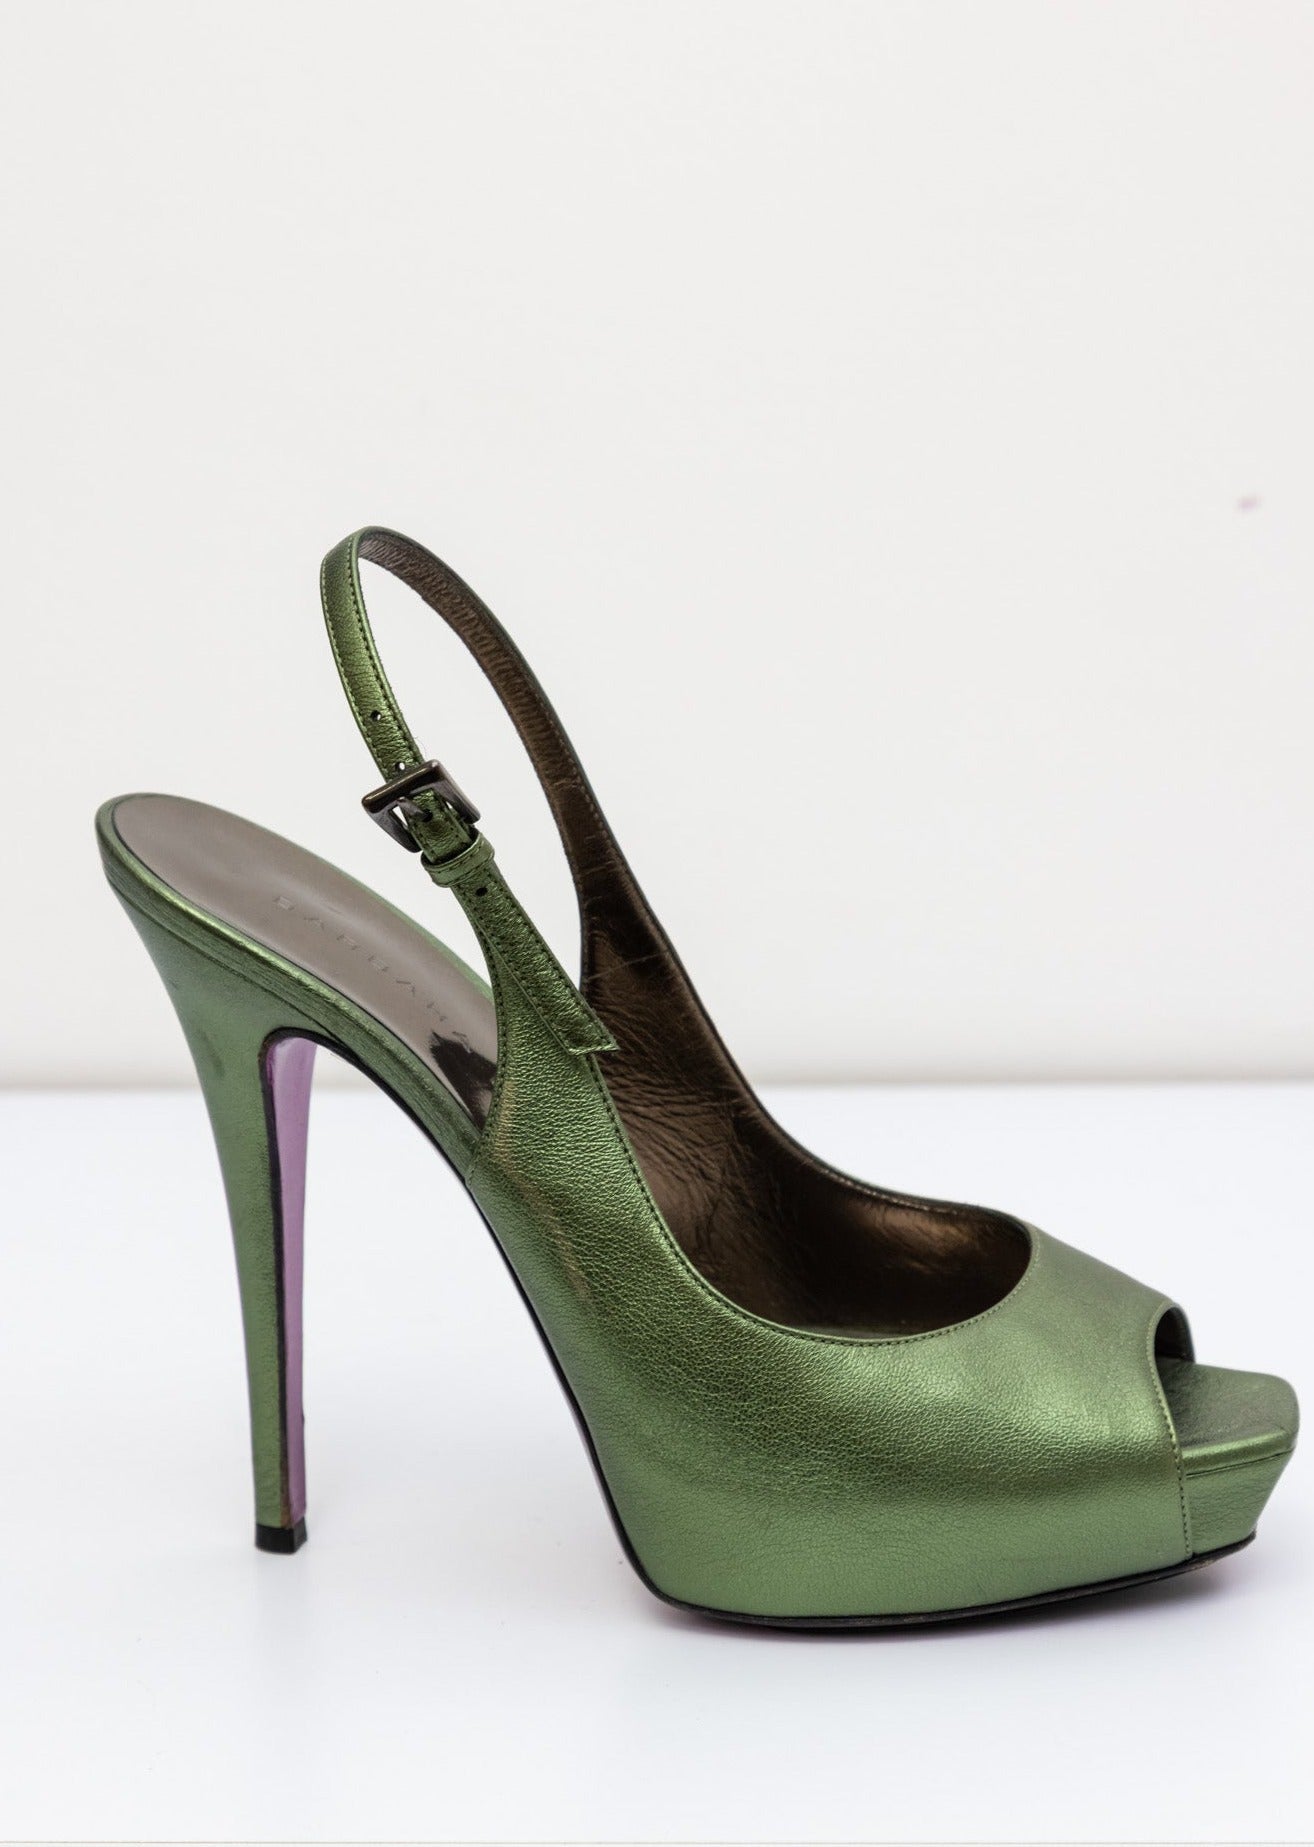 BARBARA BUI Green Metallic Slingback Leather Peeptoe Pumps | Size IT 38 | Made in Italy | Good Condition